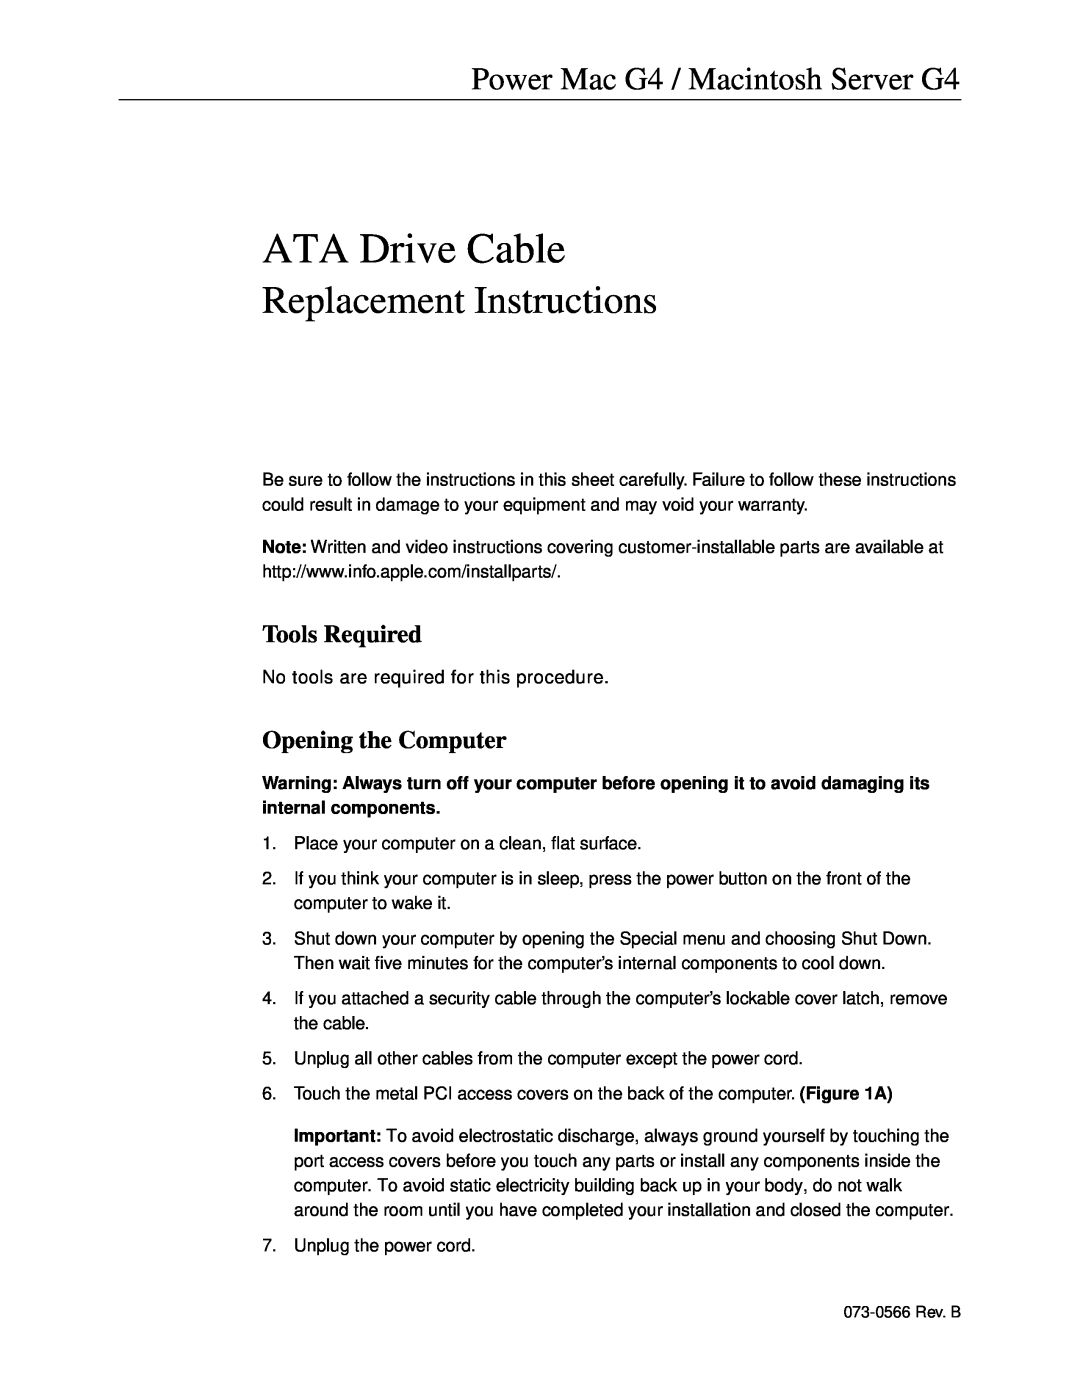 Apple ATA Drive Cable warranty Tools Required, Opening the Computer, Replacement Instructions 